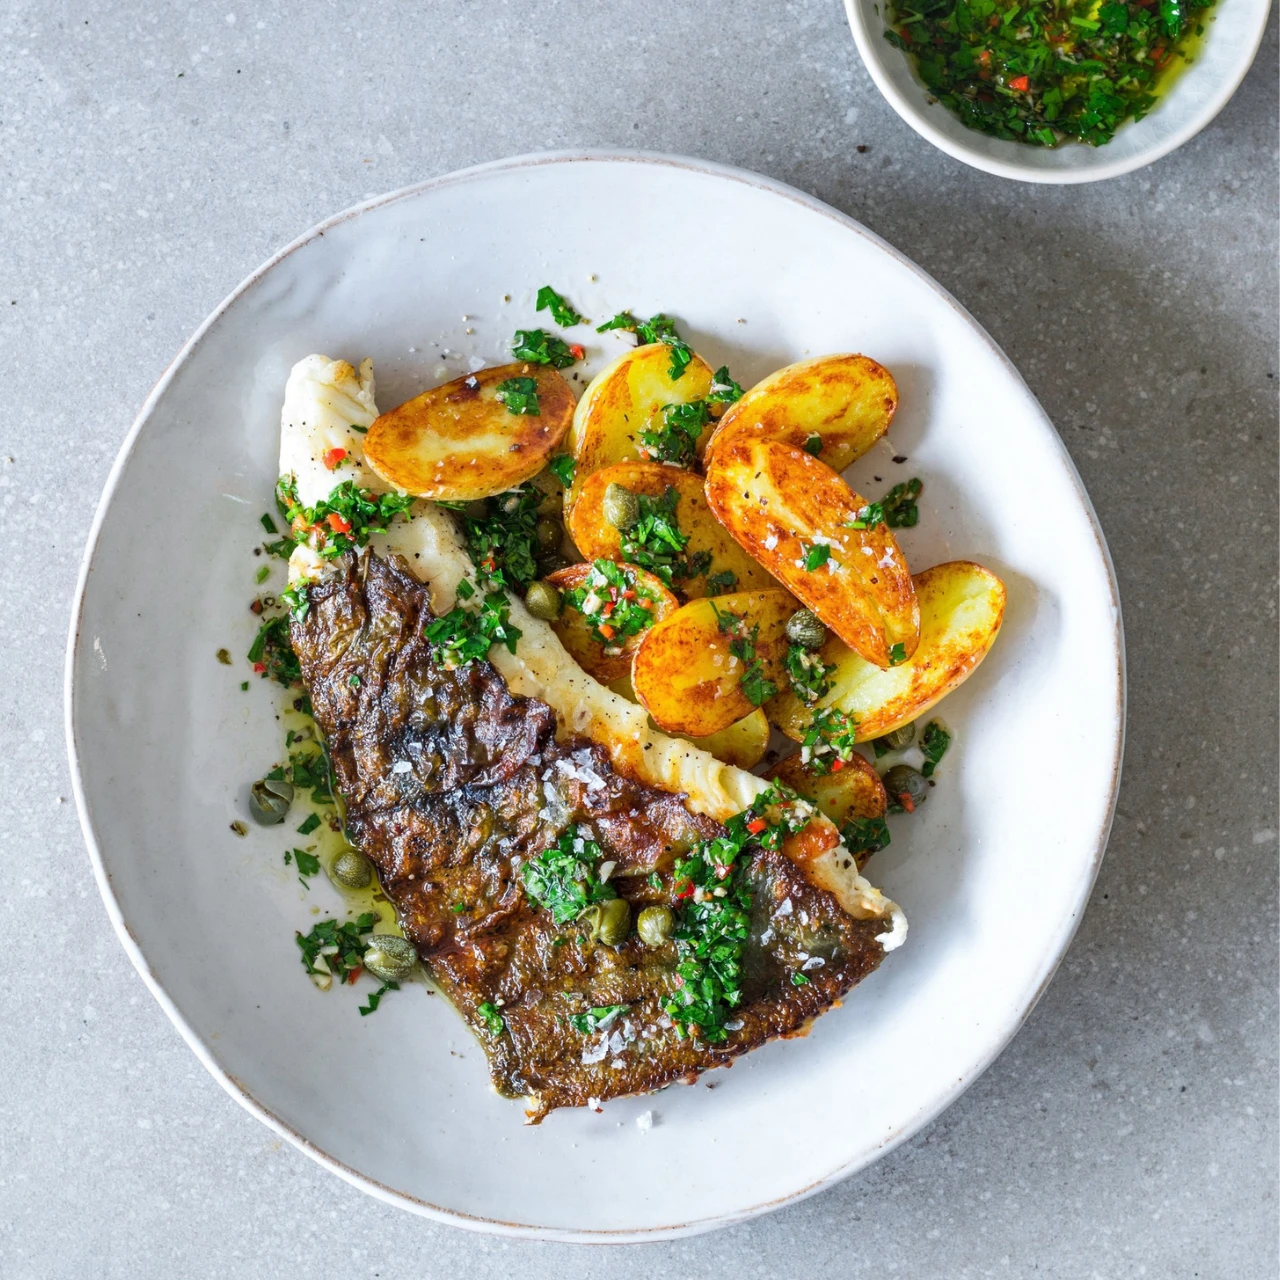 Grilled crispy skin john dory with chimichurri sauce recipe. The best way to cook John Dory or any white fish.